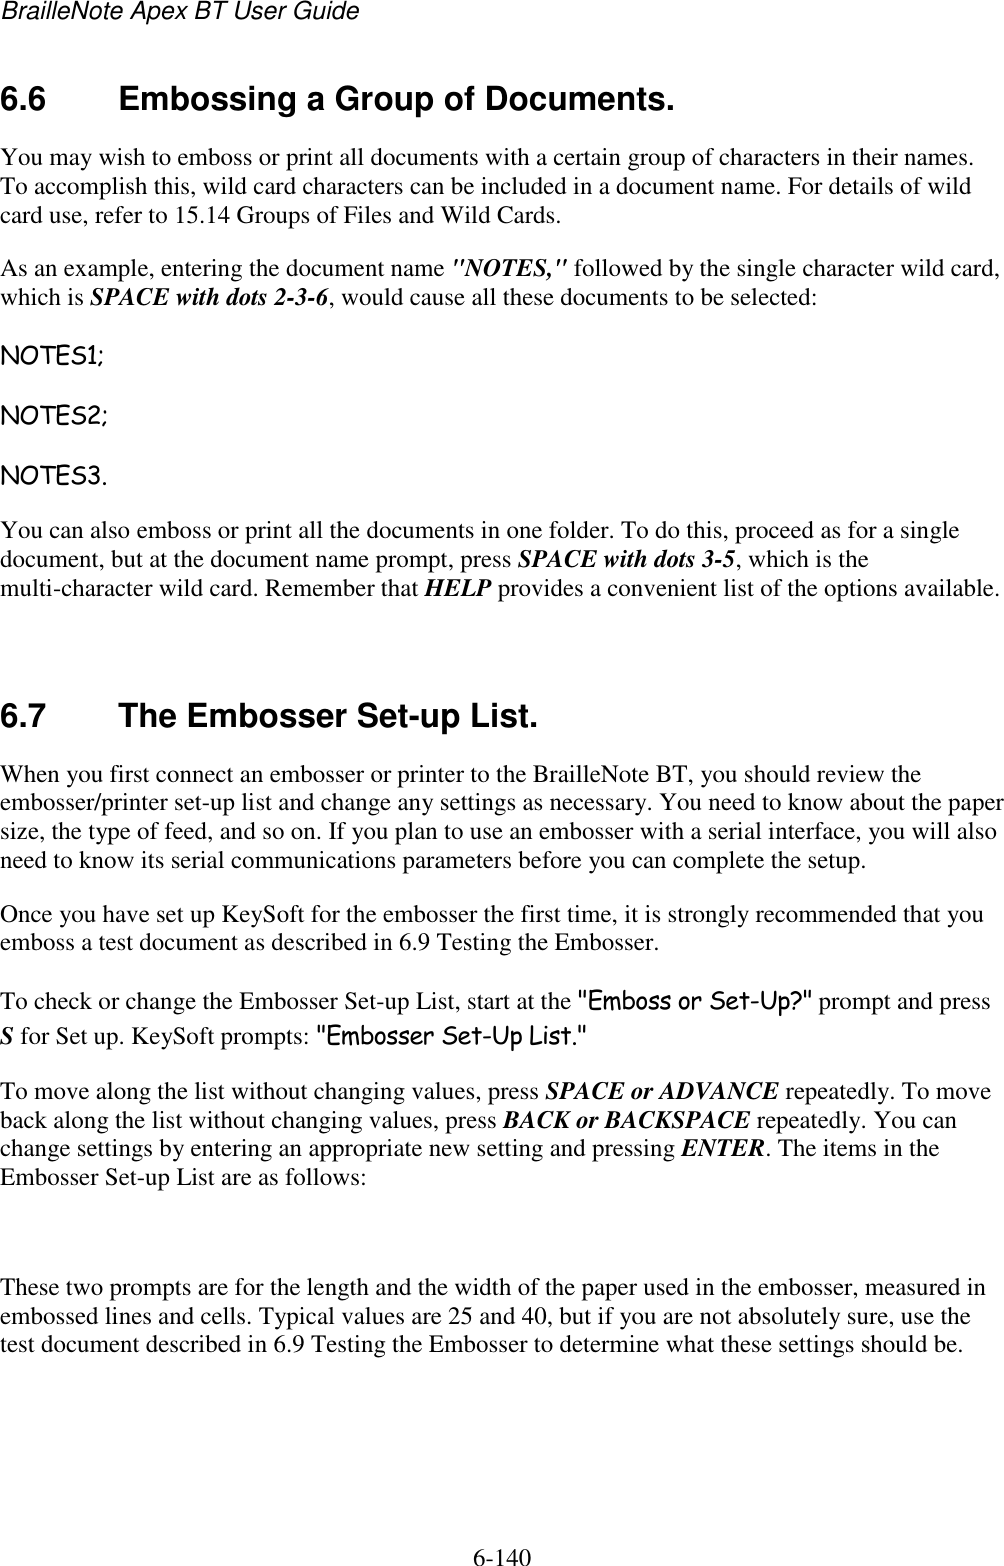 BrailleNote Apex BT User Guide   6-140   6.6  Embossing a Group of Documents. You may wish to emboss or print all documents with a certain group of characters in their names. To accomplish this, wild card characters can be included in a document name. For details of wild card use, refer to 15.14 Groups of Files and Wild Cards. As an example, entering the document name &quot;NOTES,&quot; followed by the single character wild card, which is SPACE with dots 2-3-6, would cause all these documents to be selected: NOTES1; NOTES2; NOTES3. You can also emboss or print all the documents in one folder. To do this, proceed as for a single document, but at the document name prompt, press SPACE with dots 3-5, which is the multi-character wild card. Remember that HELP provides a convenient list of the options available.   6.7  The Embosser Set-up List. When you first connect an embosser or printer to the BrailleNote BT, you should review the embosser/printer set-up list and change any settings as necessary. You need to know about the paper size, the type of feed, and so on. If you plan to use an embosser with a serial interface, you will also need to know its serial communications parameters before you can complete the setup. Once you have set up KeySoft for the embosser the first time, it is strongly recommended that you emboss a test document as described in 6.9 Testing the Embosser. To check or change the Embosser Set-up List, start at the &quot;Emboss or Set-Up?&quot; prompt and press S for Set up. KeySoft prompts: &quot;Embosser Set-Up List.&quot; To move along the list without changing values, press SPACE or ADVANCE repeatedly. To move back along the list without changing values, press BACK or BACKSPACE repeatedly. You can change settings by entering an appropriate new setting and pressing ENTER. The items in the Embosser Set-up List are as follows:   These two prompts are for the length and the width of the paper used in the embosser, measured in embossed lines and cells. Typical values are 25 and 40, but if you are not absolutely sure, use the test document described in 6.9 Testing the Embosser to determine what these settings should be.   